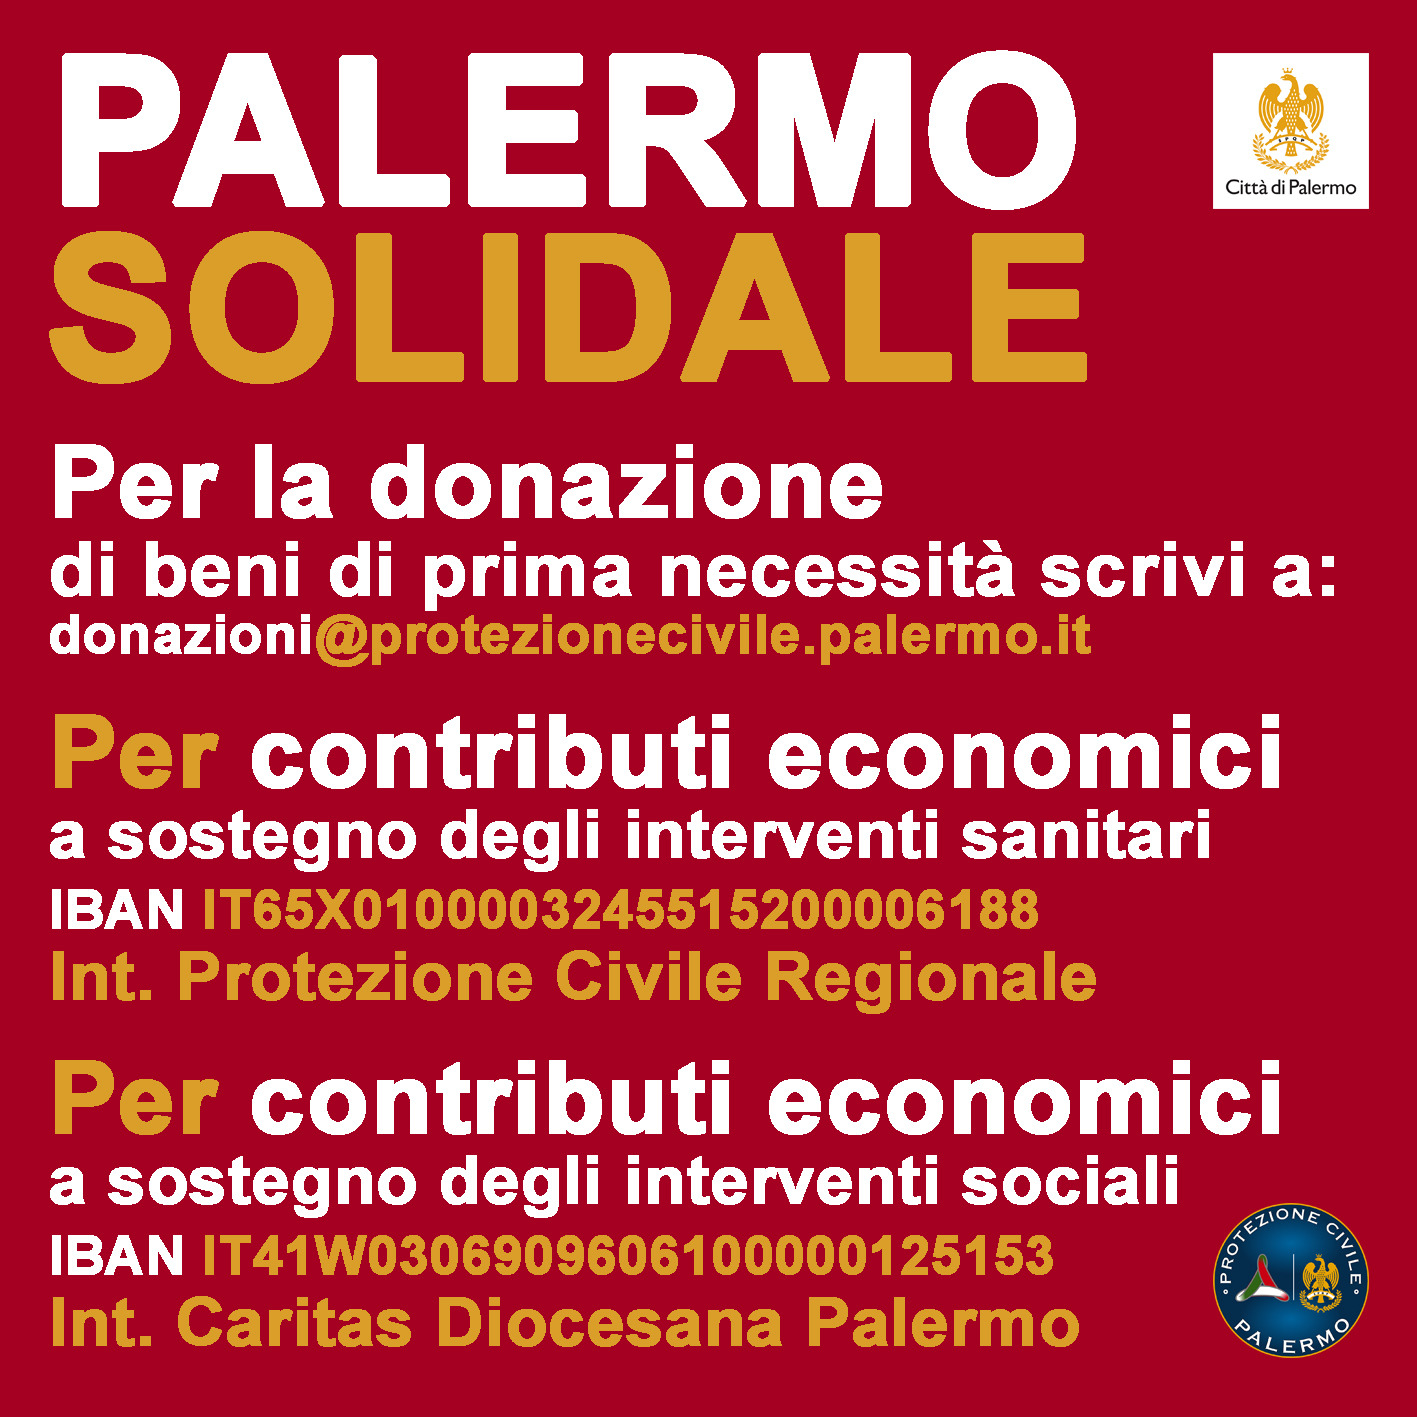 Palermo solidale